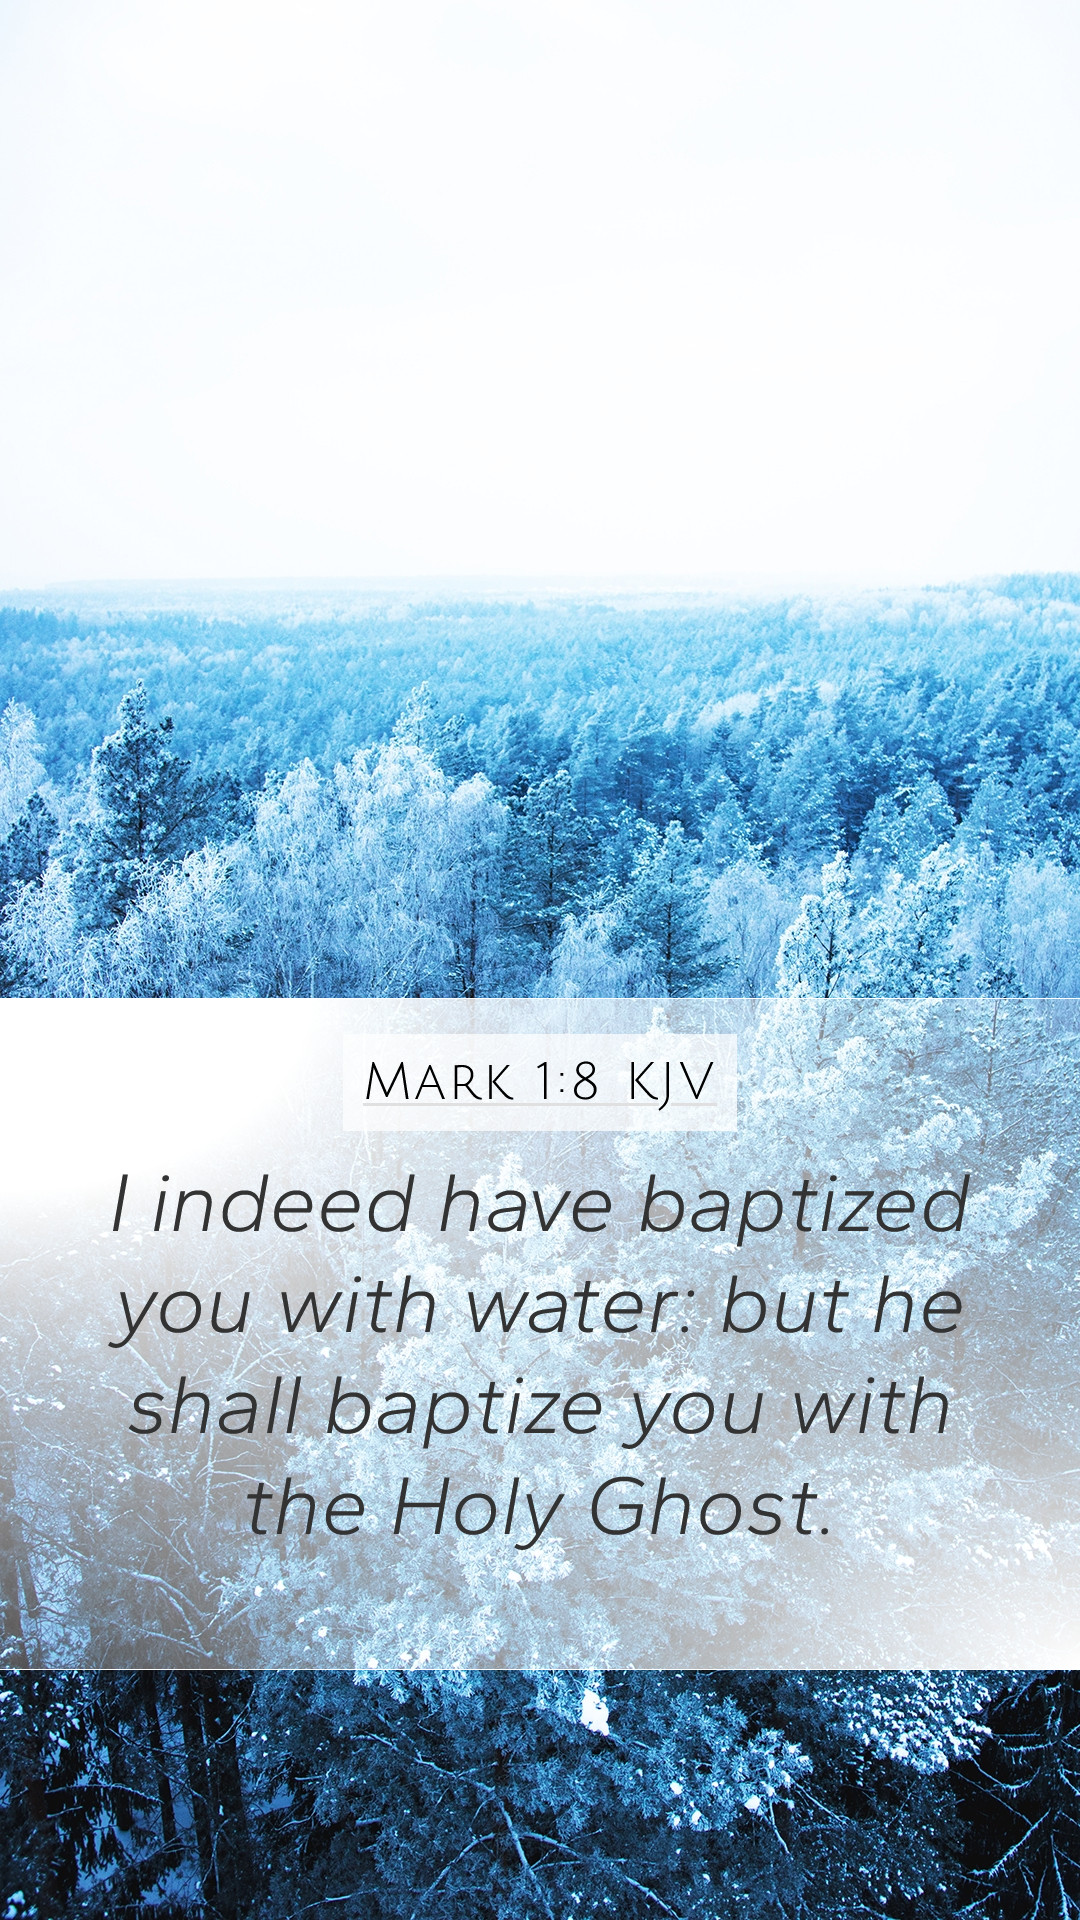 Mark 1:8 KJV mobile phone wallpaper - I indeed have baptized you with water: but he shall baptize you with the Holy Ghost. - Christian iPhone